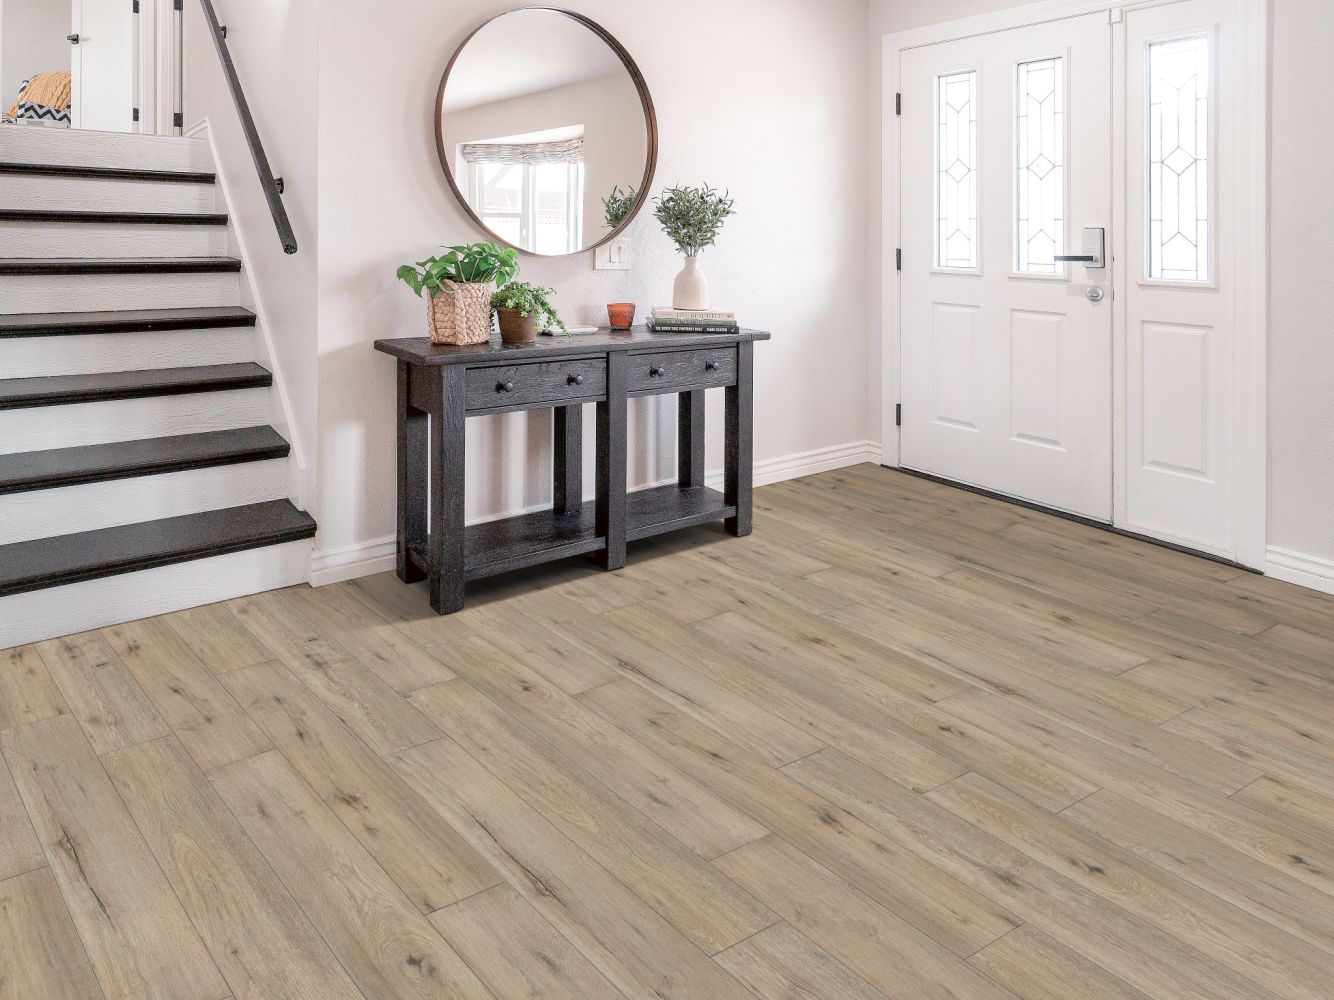 Shaw Floors Resilient Residential Pantheon HD Plus Sabbia 02103_2001V